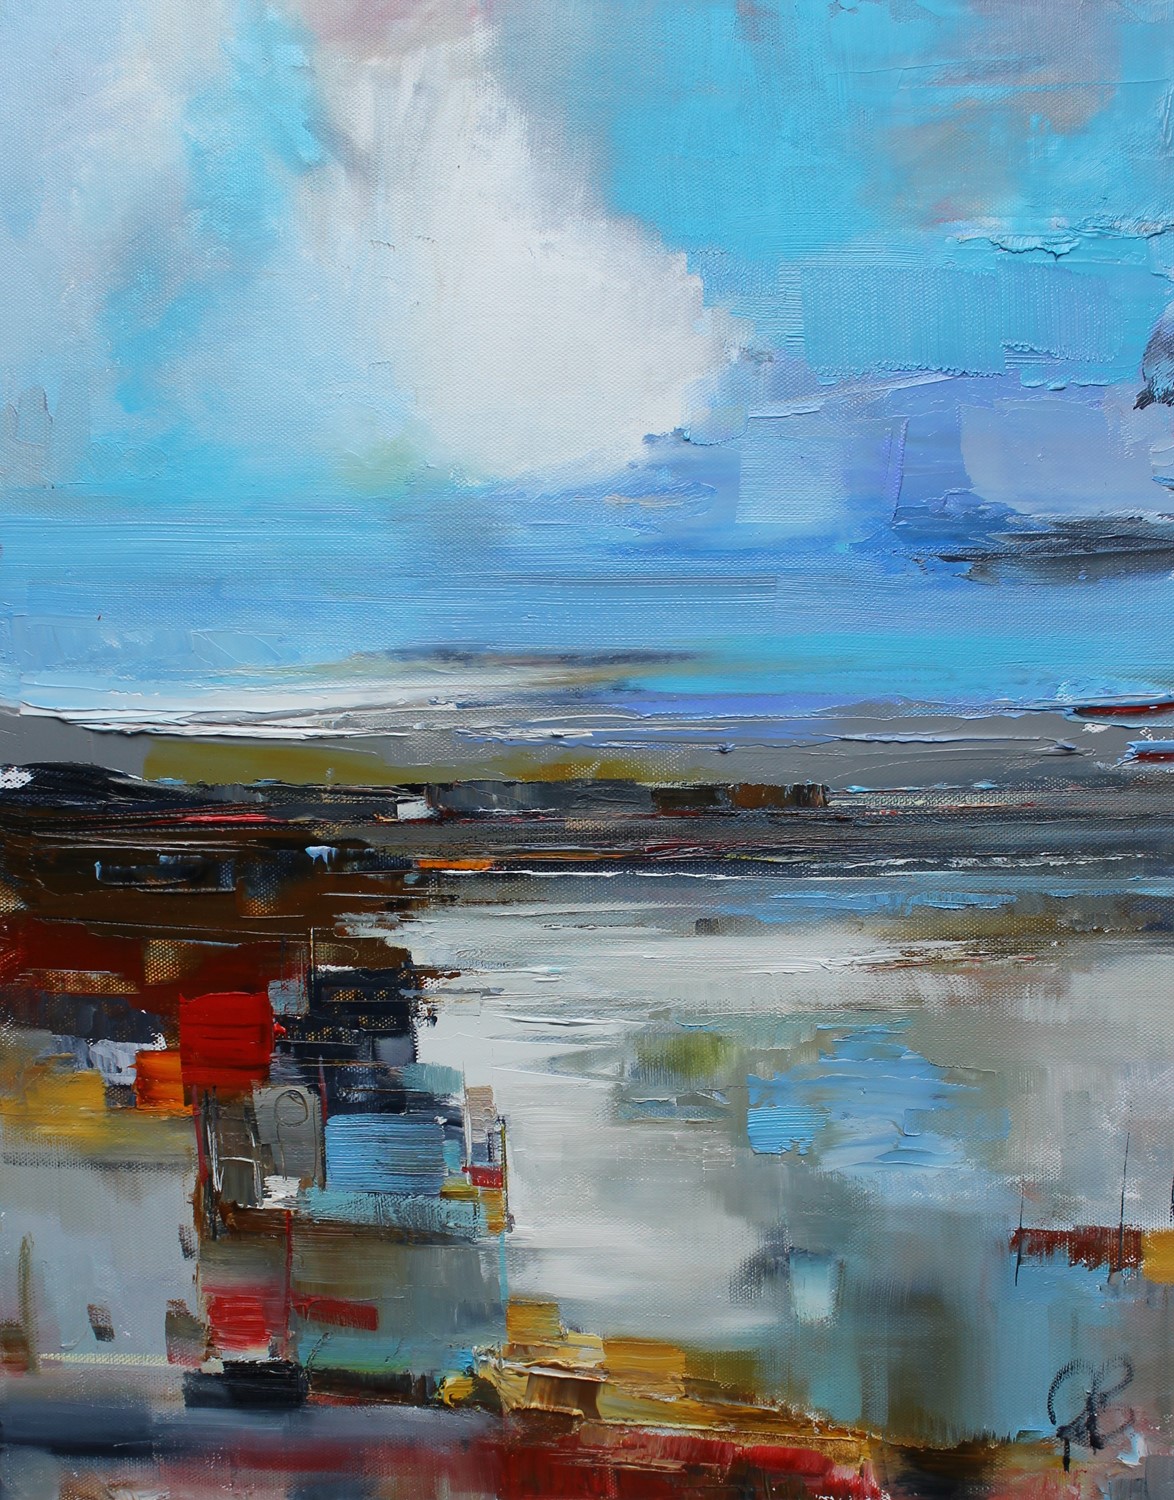 'Exploring the jetty' by artist Rosanne Barr